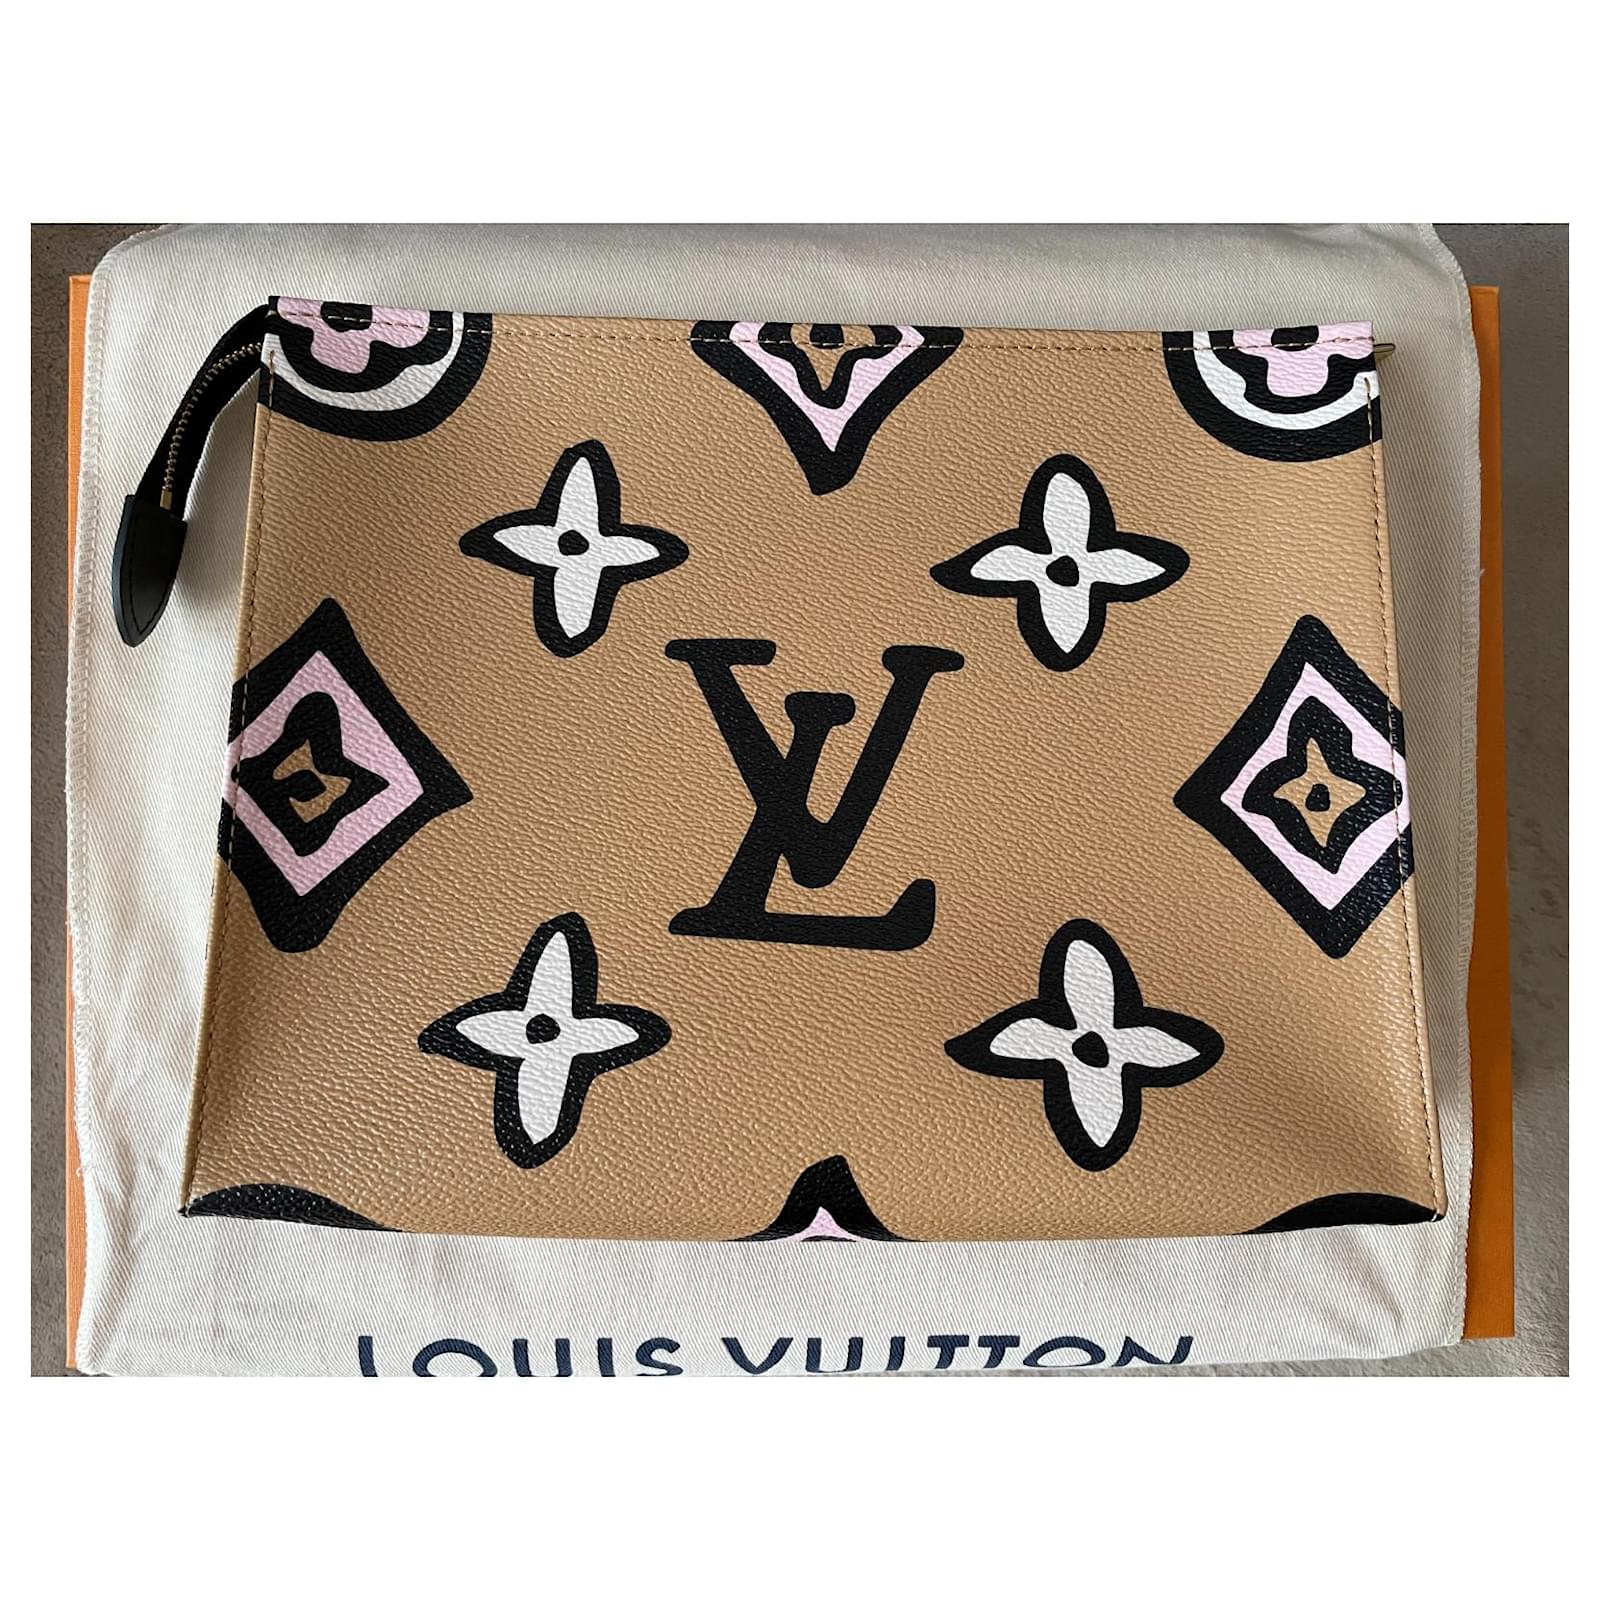 Louis Vuitton toilet pouch 26 wild at heart collection New Beige